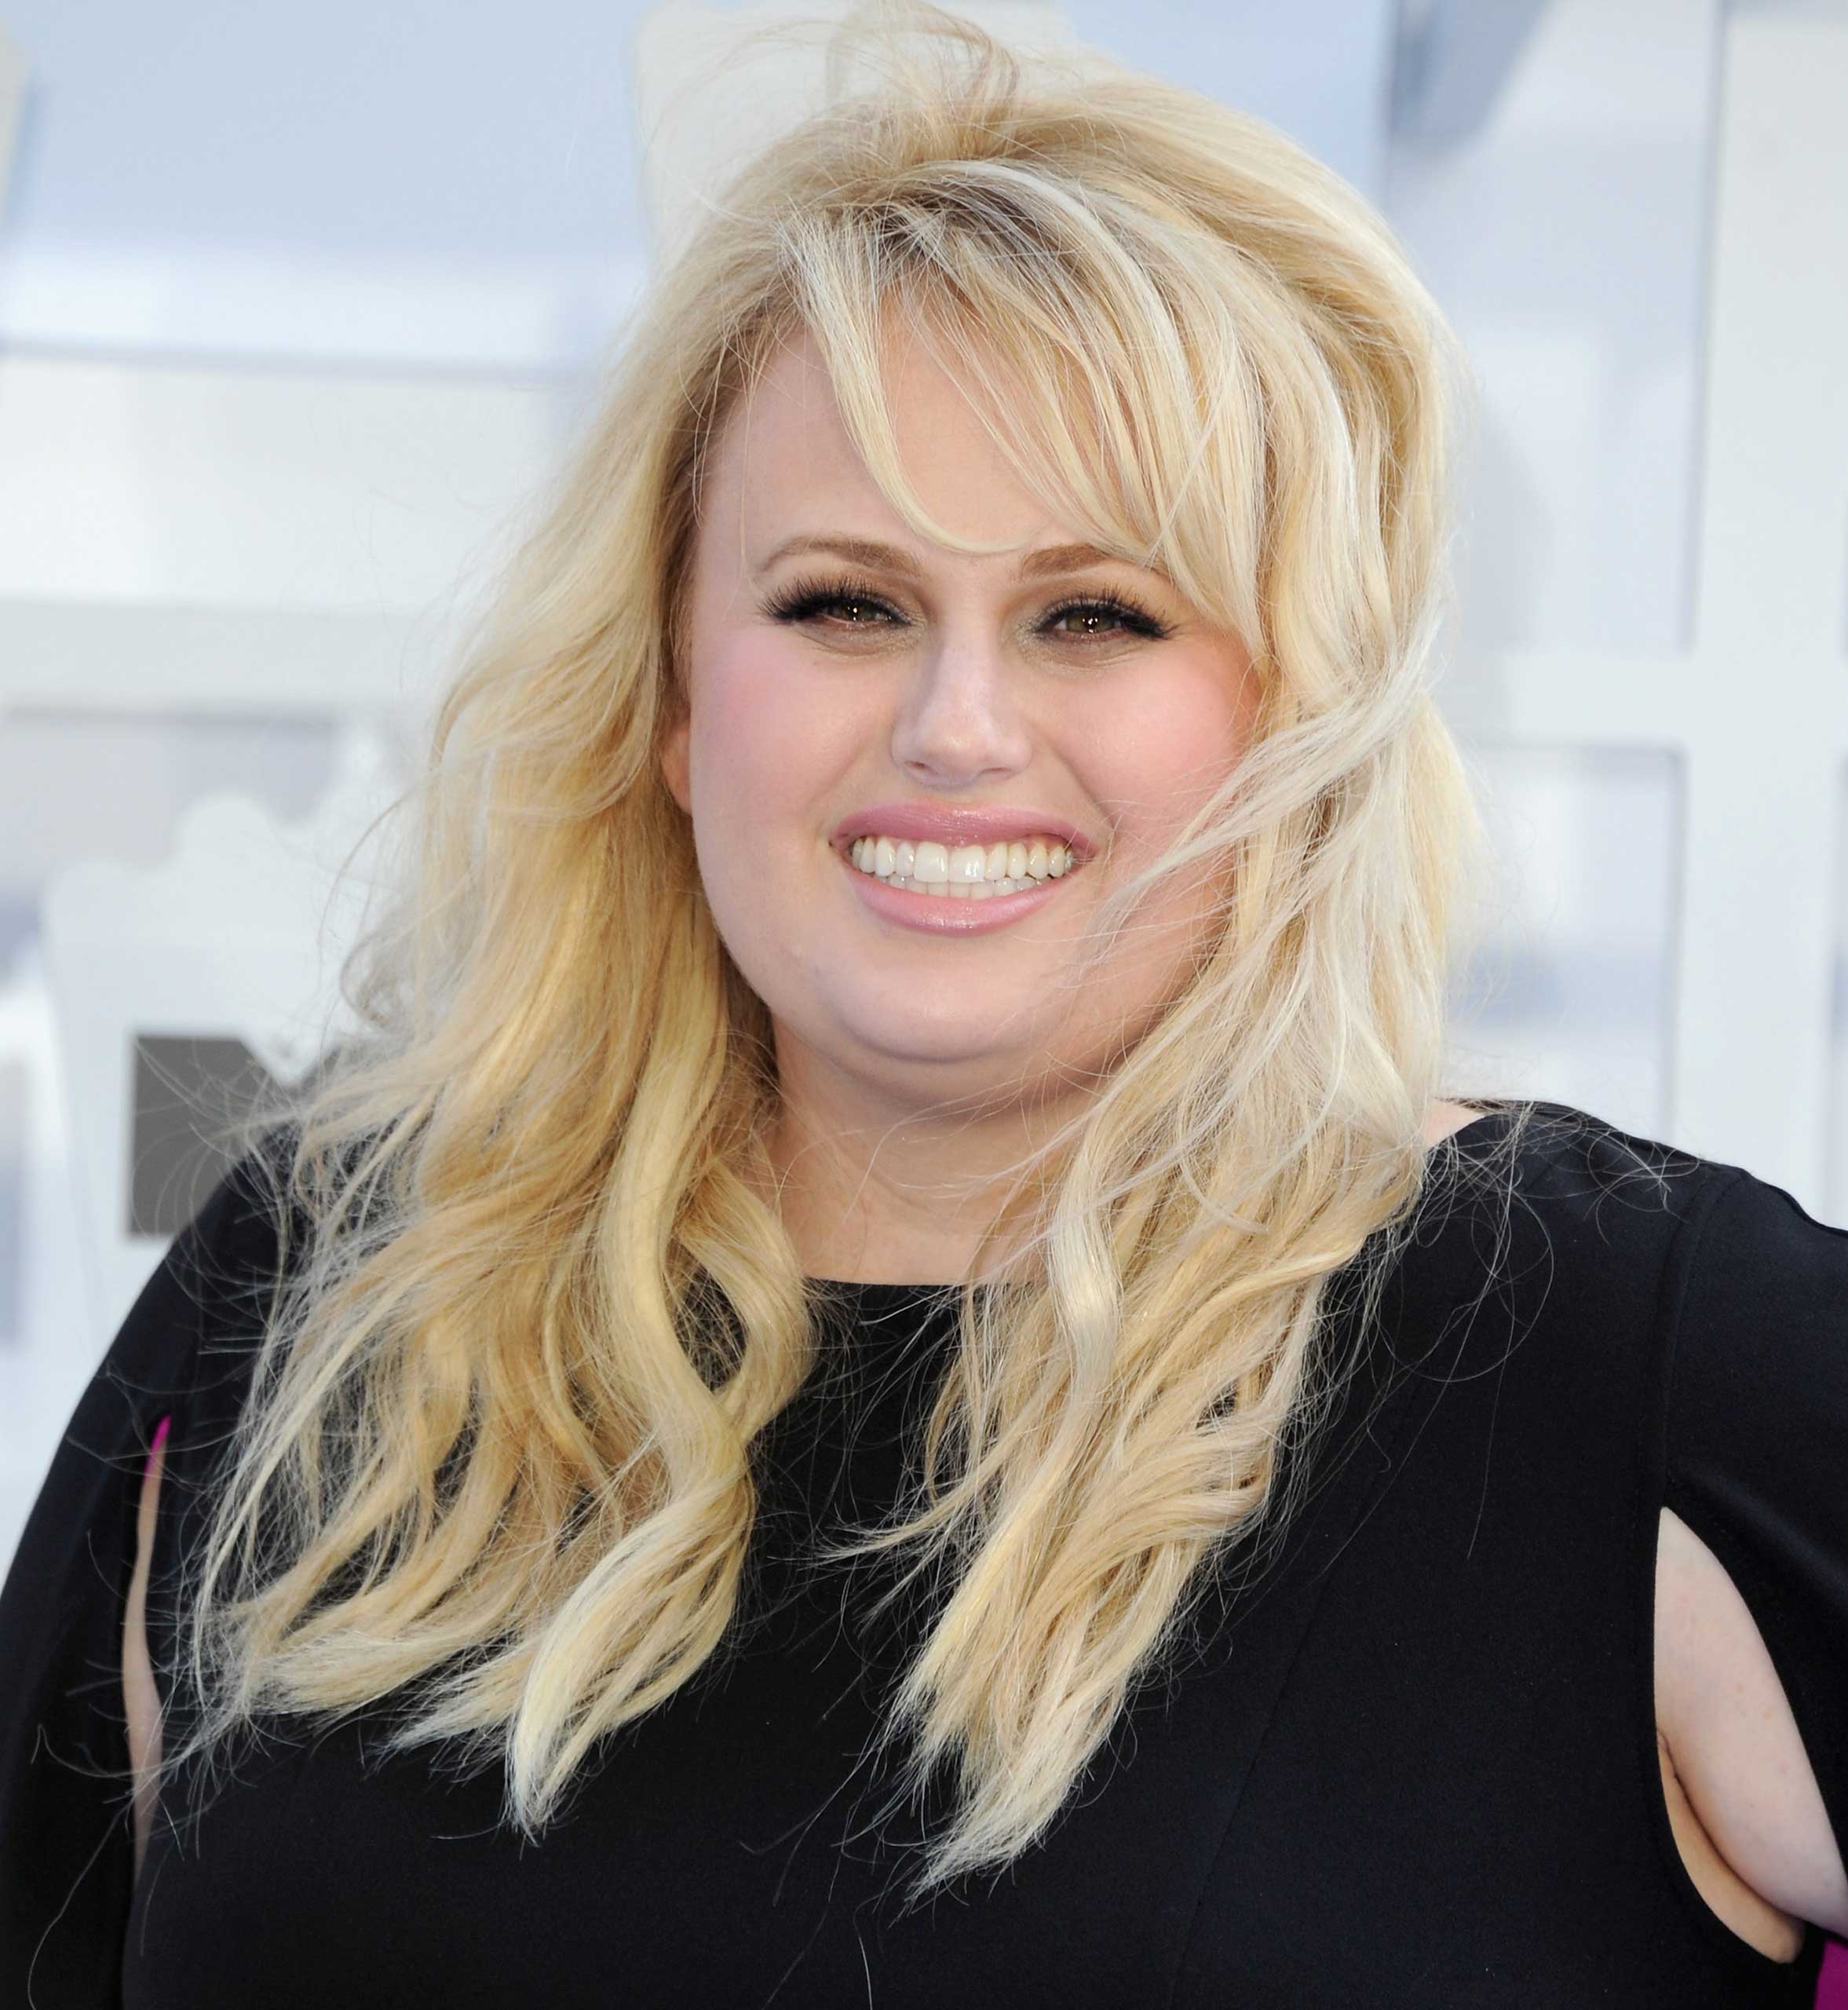 Actress Rebel Wilson arrives at the 2015 MTV Movie Awards at Nokia Theatre L.A.